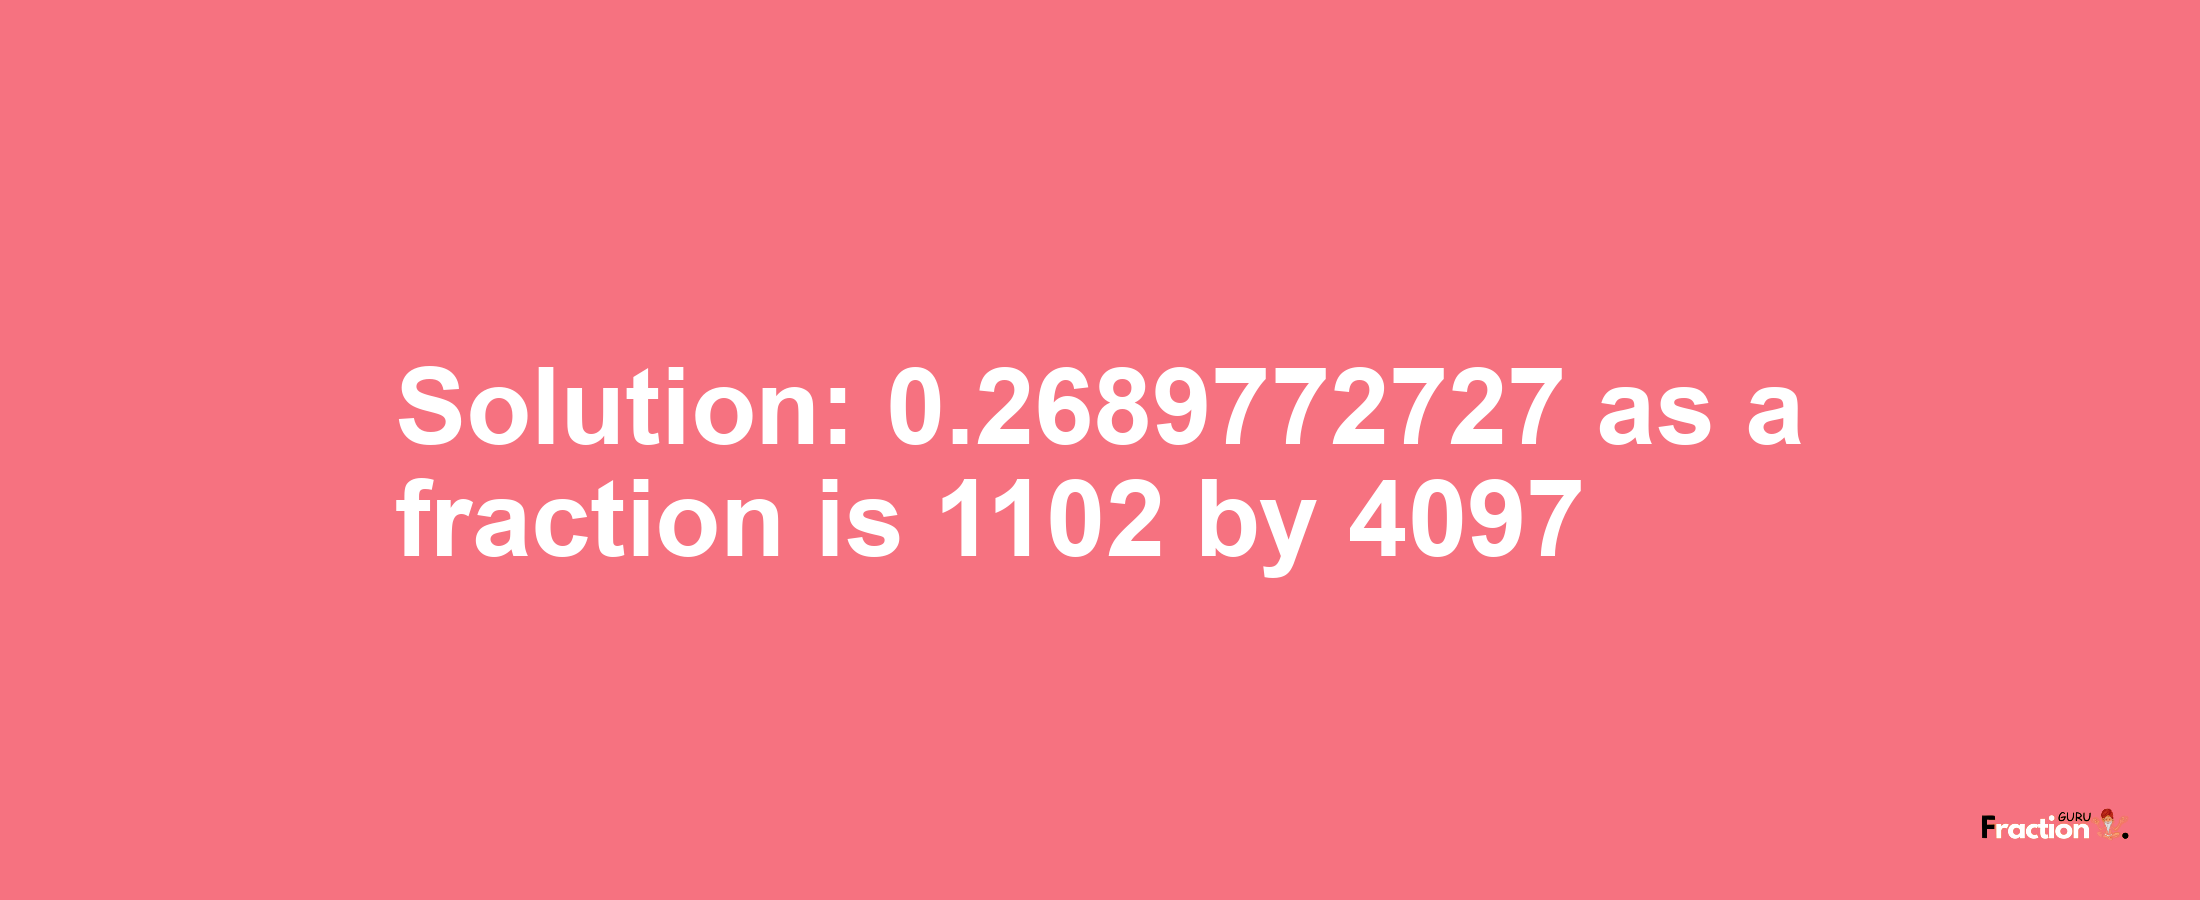 Solution:0.2689772727 as a fraction is 1102/4097